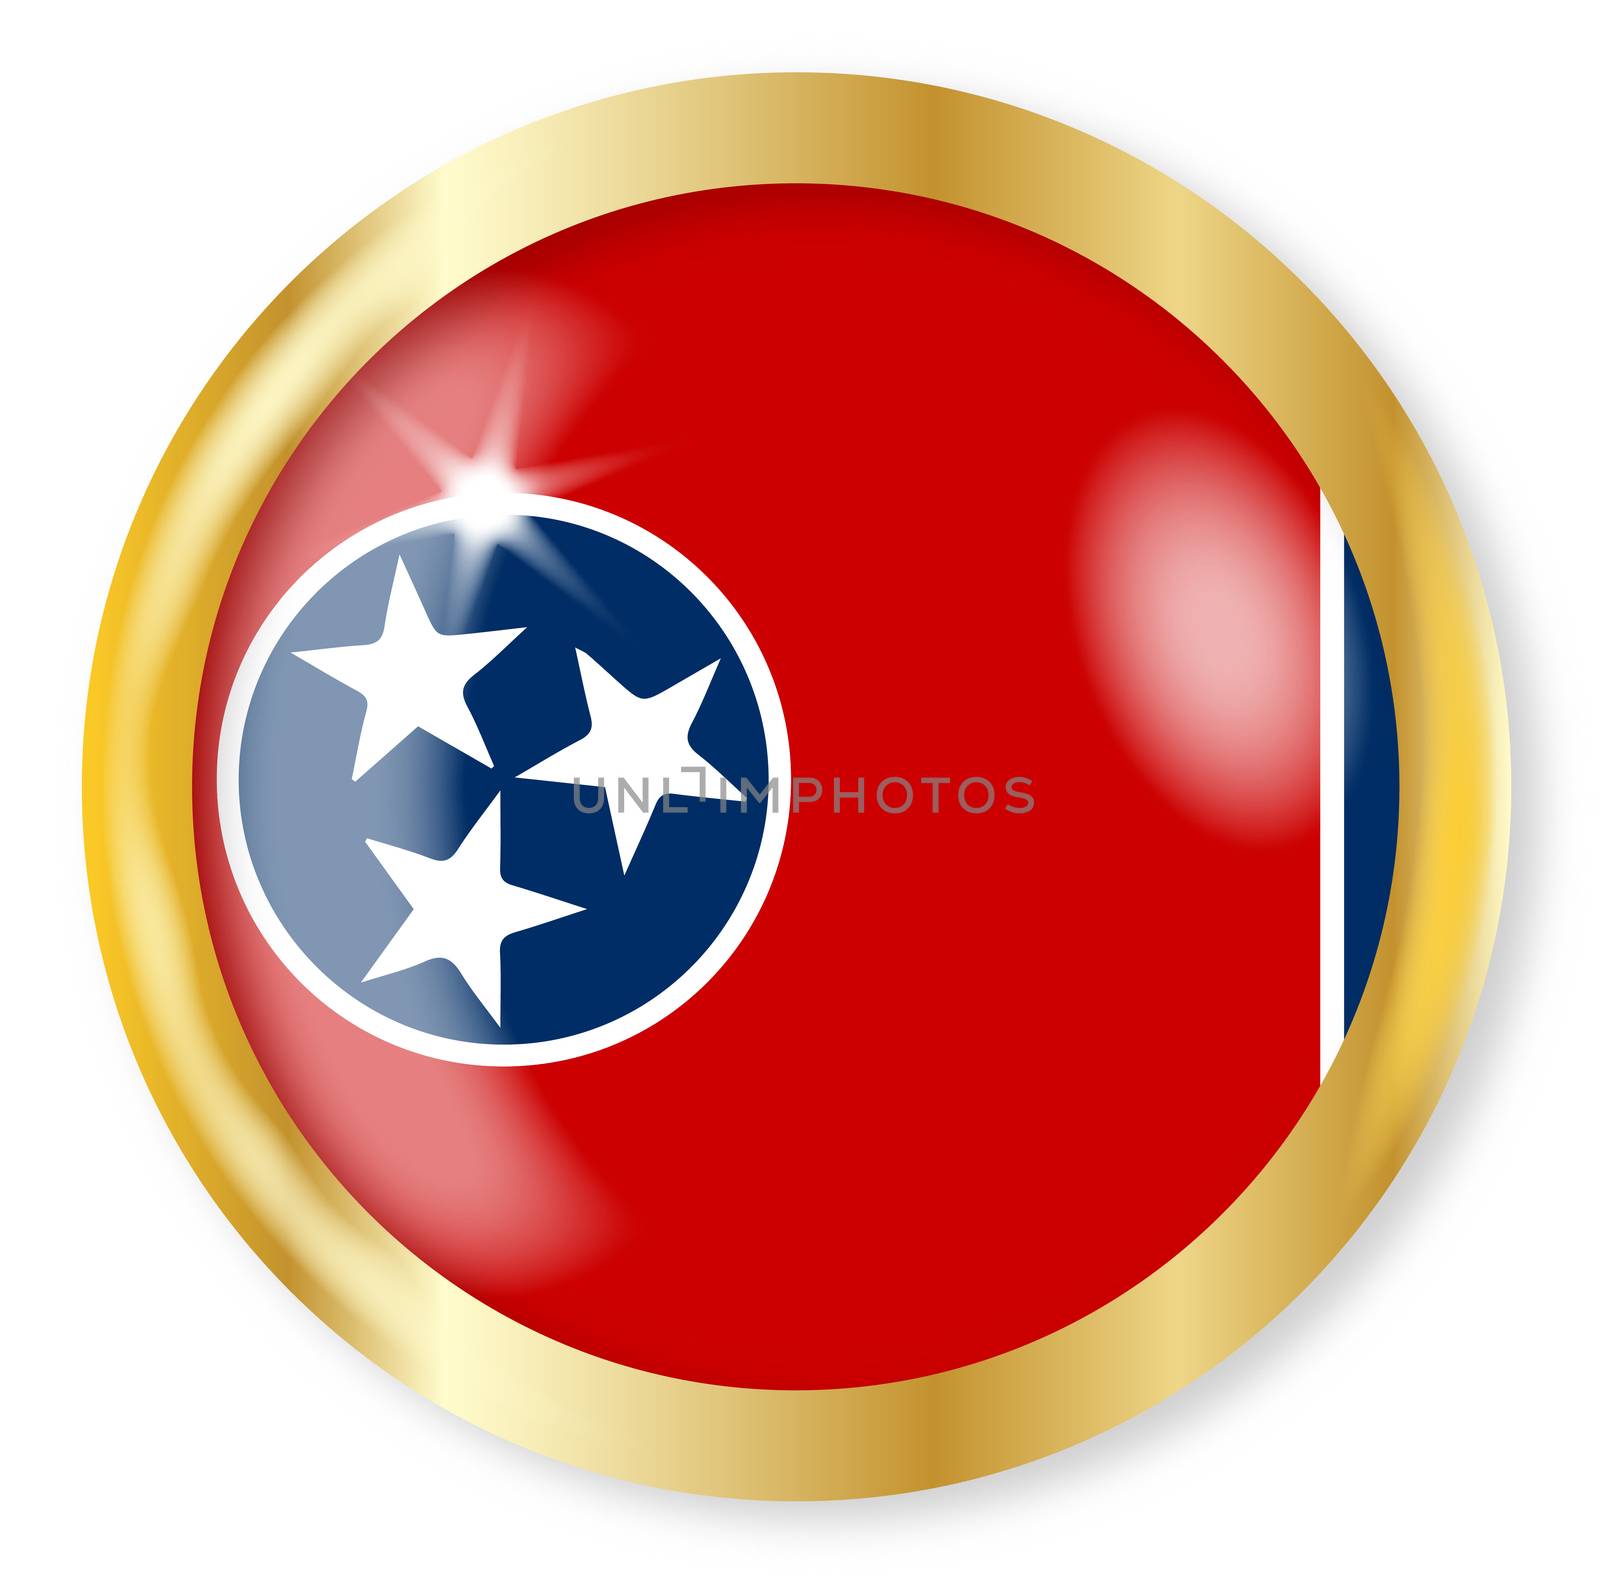 Tennessee state flag button with a gold metal circular border over a white background